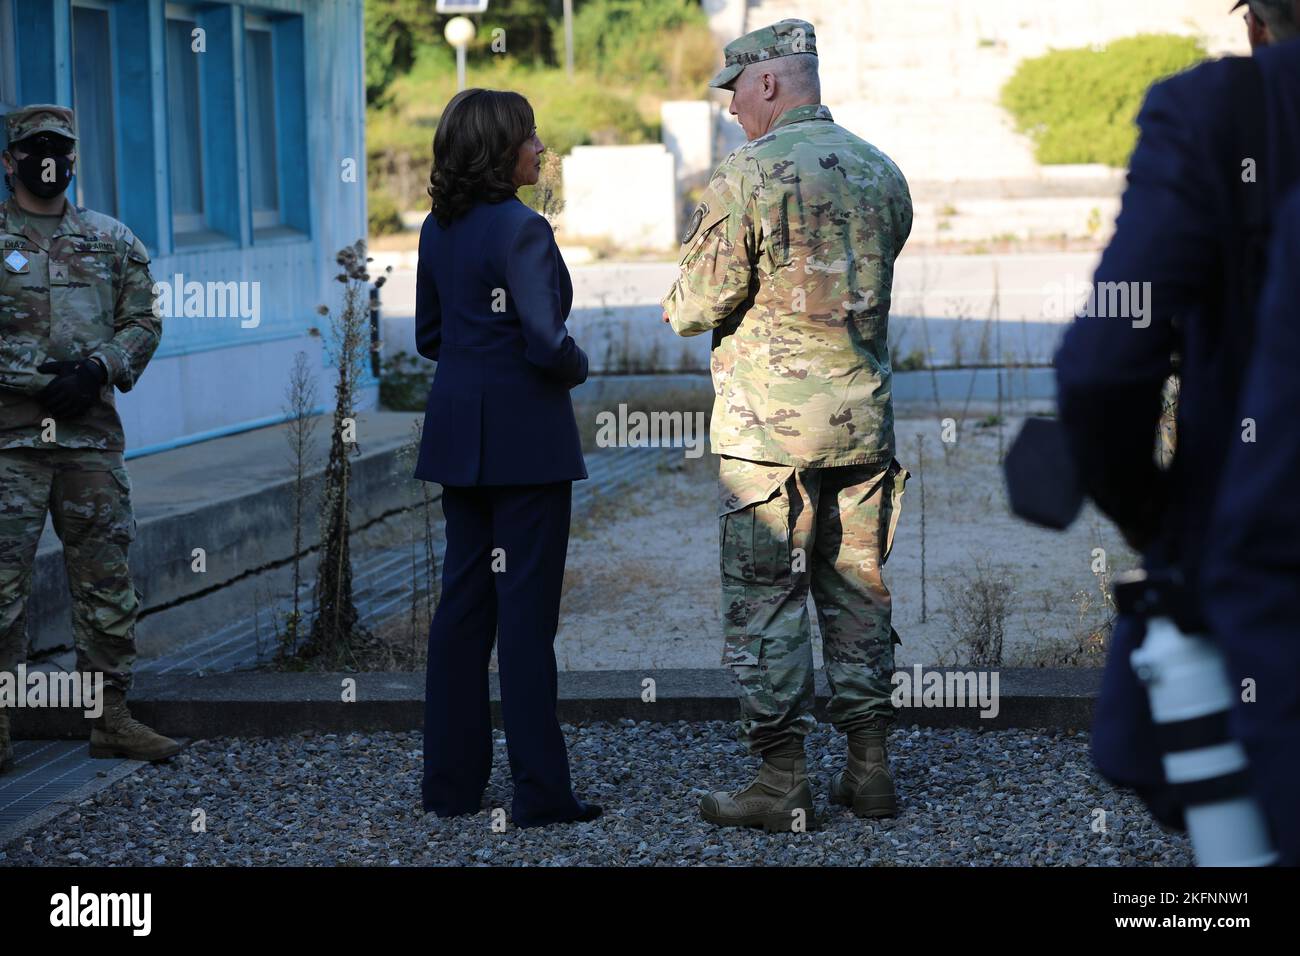 U.S. Vice President Kamala Harris and U.S. Gen. Paul LaCamera stand next to the demarcation line at the demilitarized zone in Panmunjom, South Korea, Sept. 29, 2022. The demarcation line is the official border marker separating South and North Korea. Stock Photo